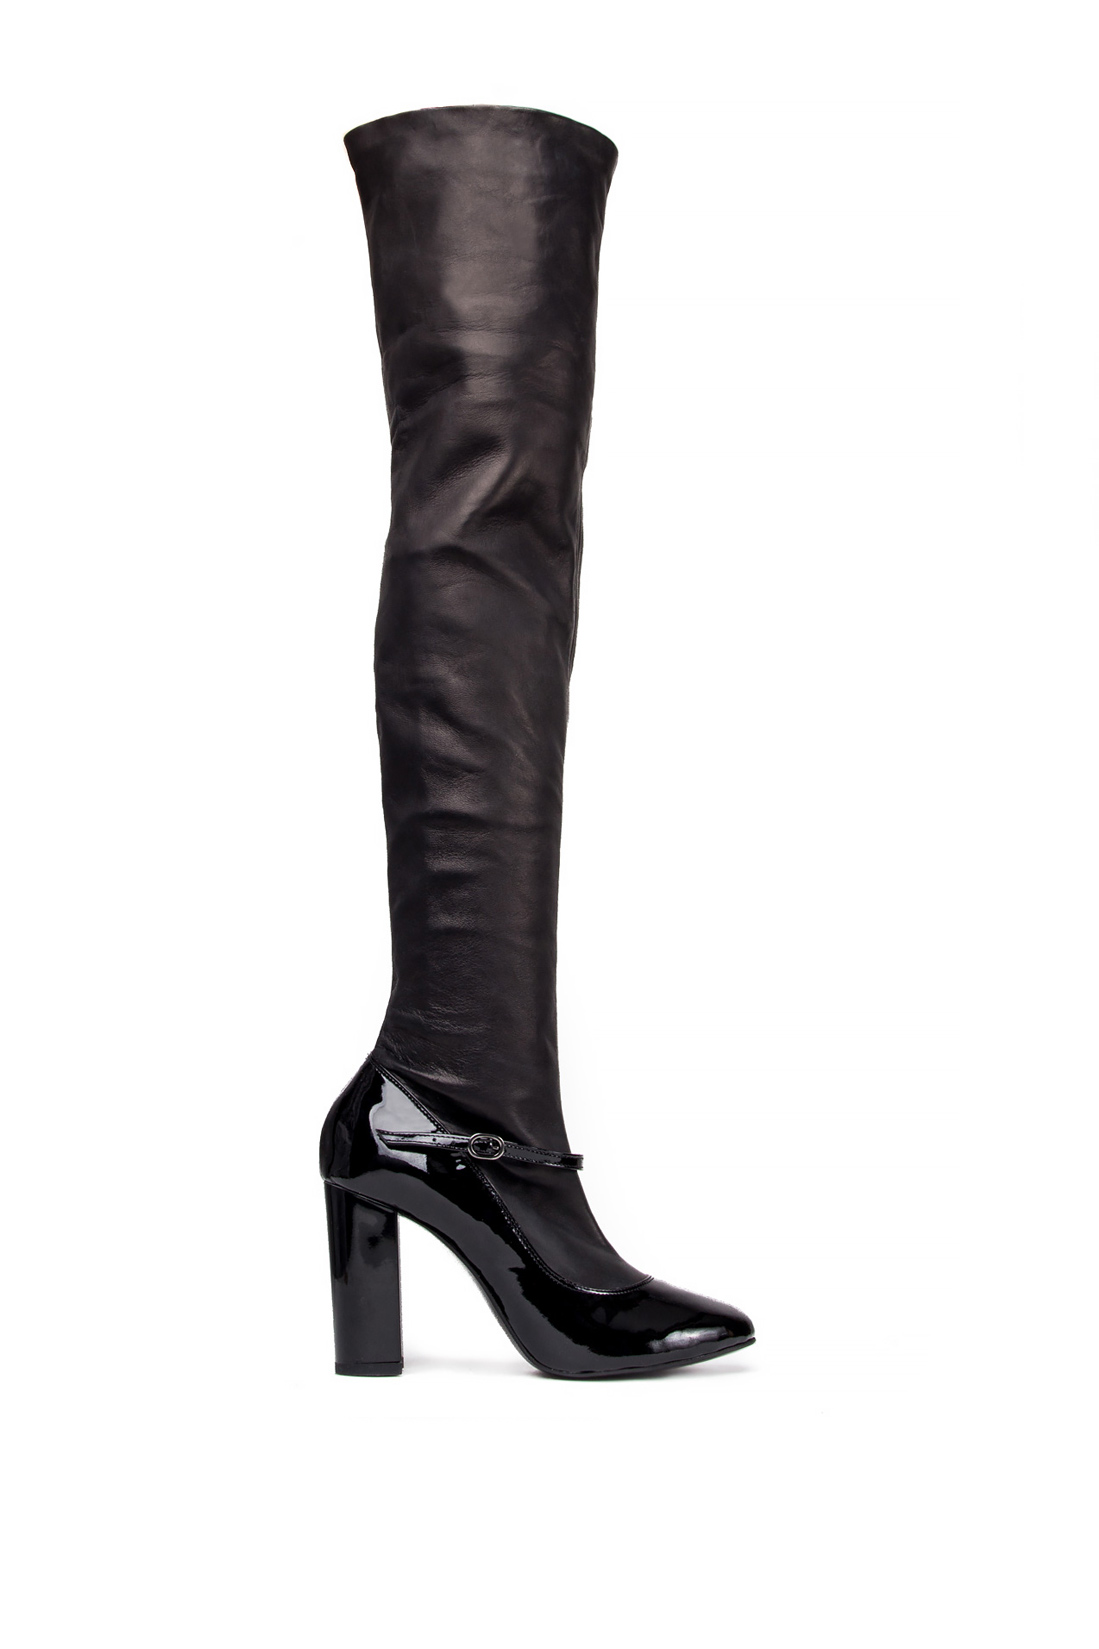 Leather over-the-knee boots Ana Kaloni image 0